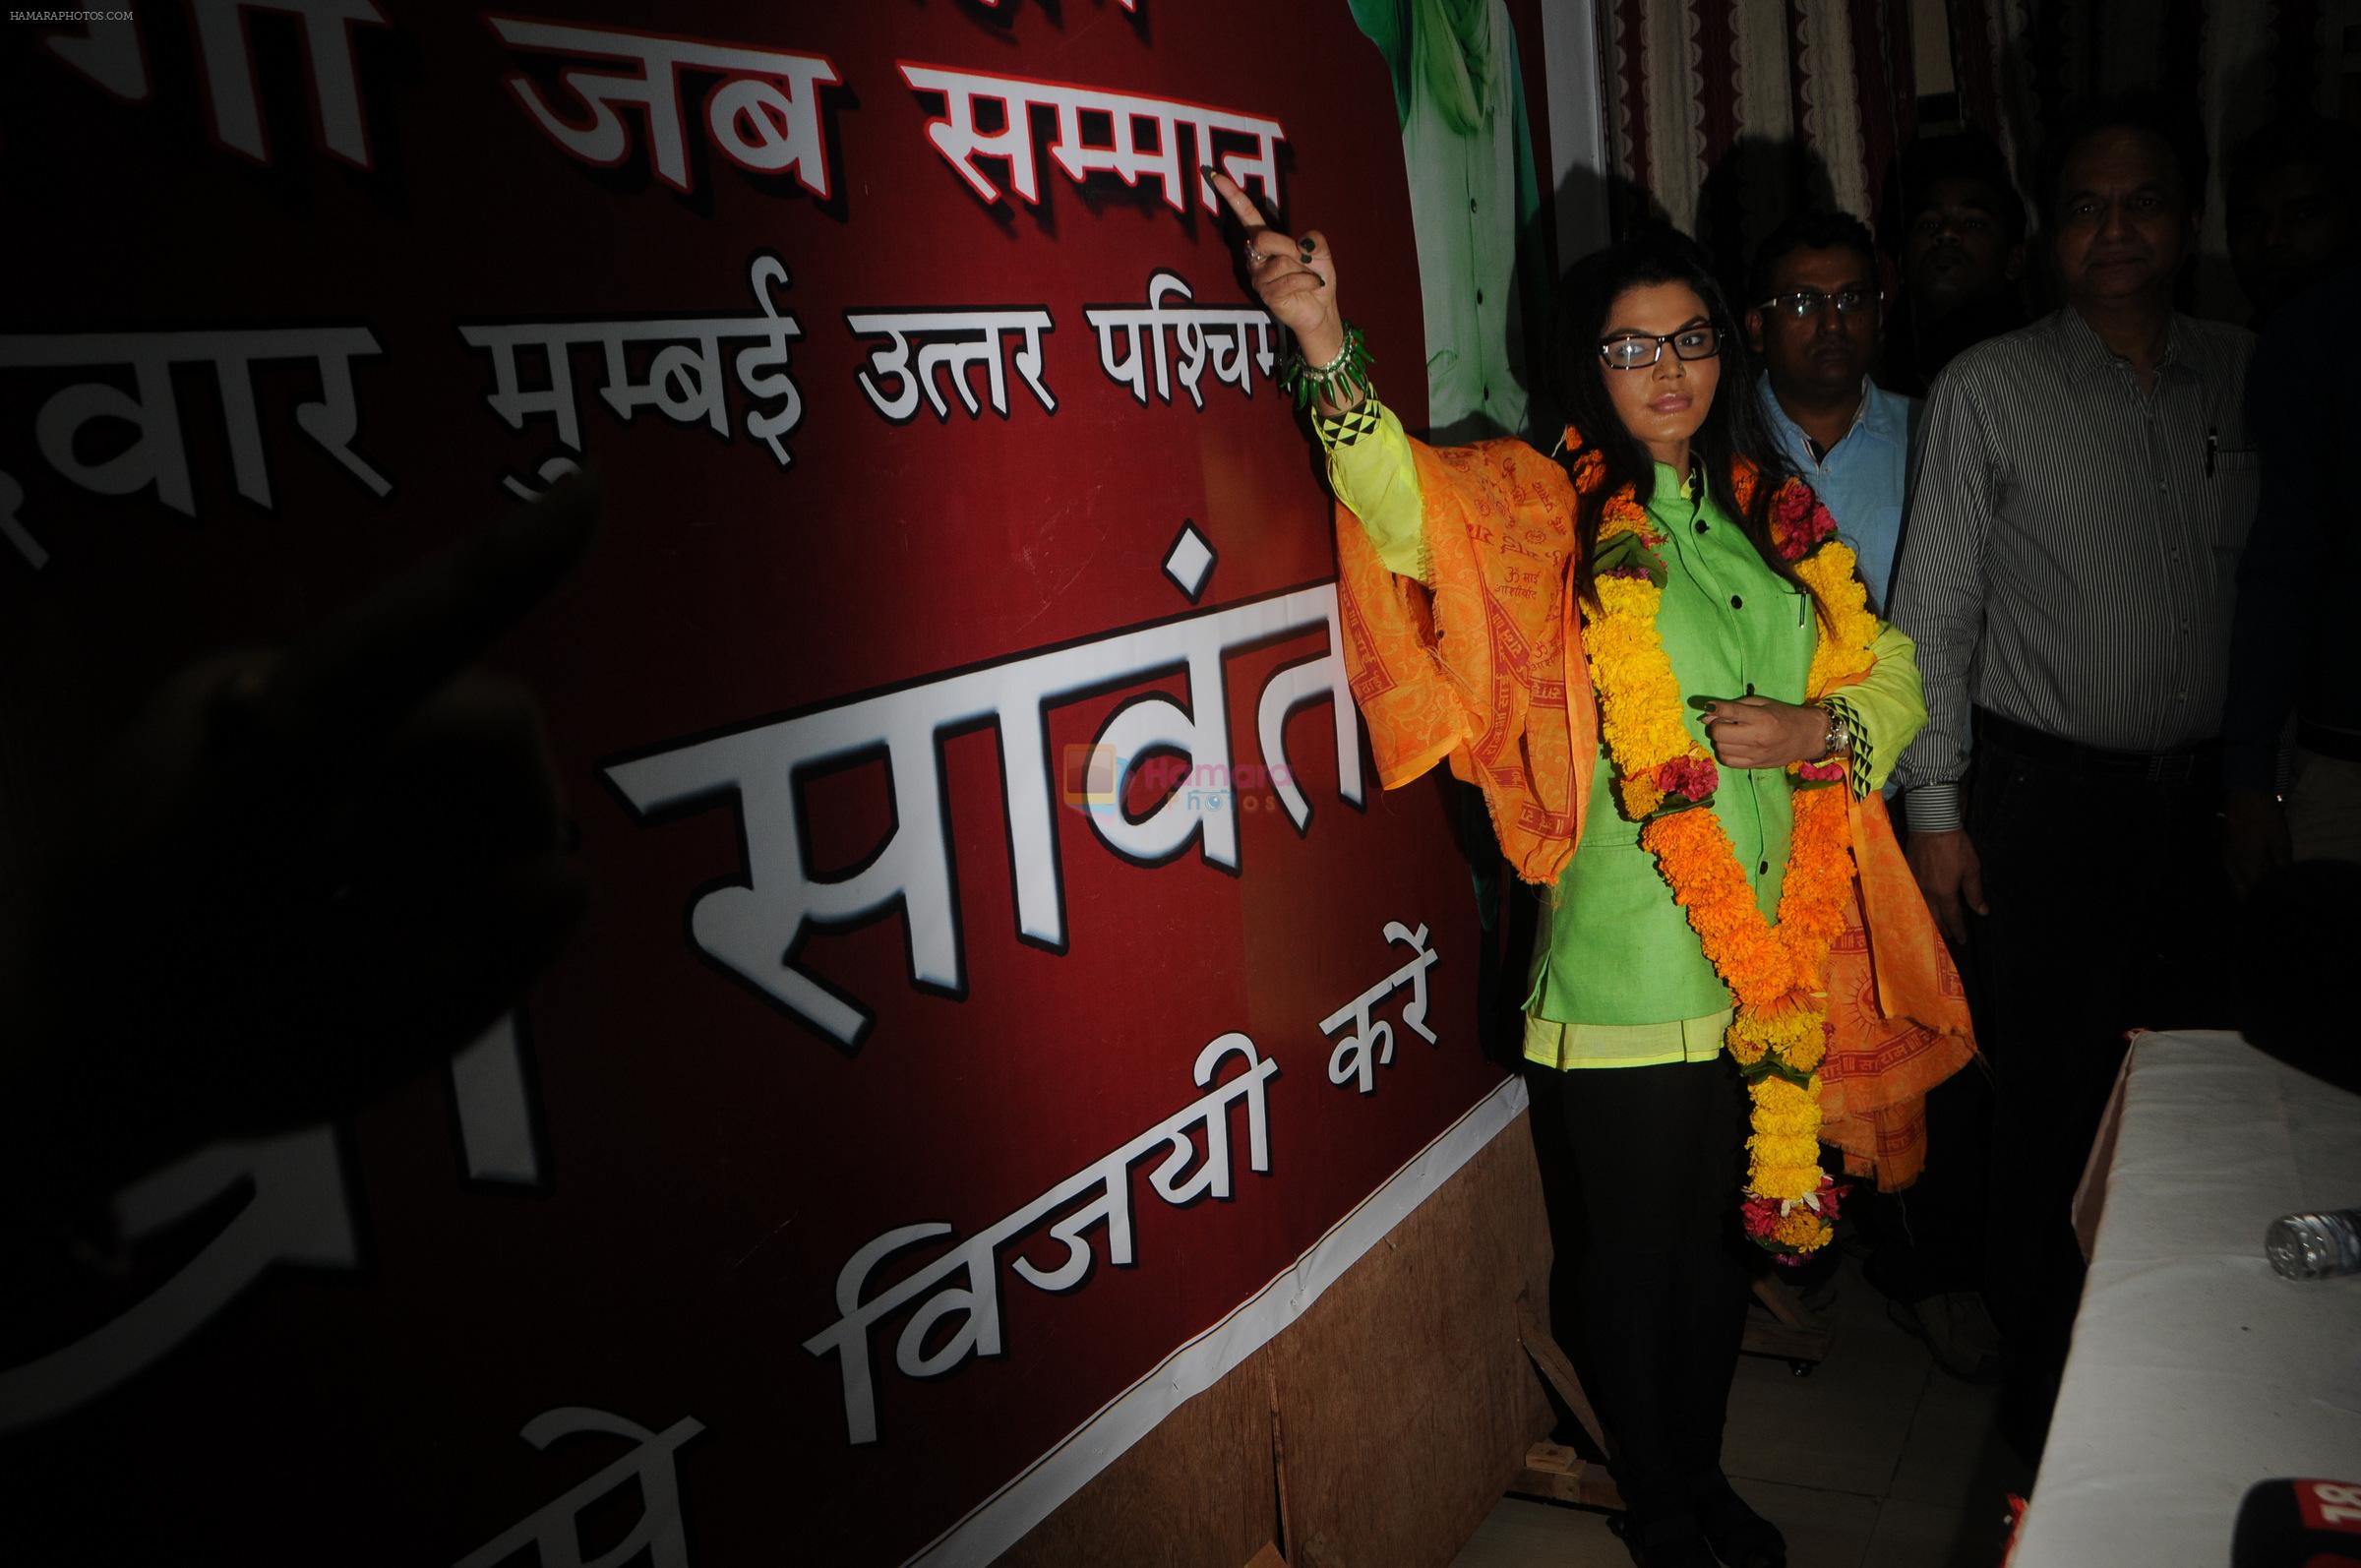 Rakhi Sawant will be contesting the Lok Sabha election battling for the position through Rashtriya Aam Party from the Mumbai North-West constituency on 28th March 2014